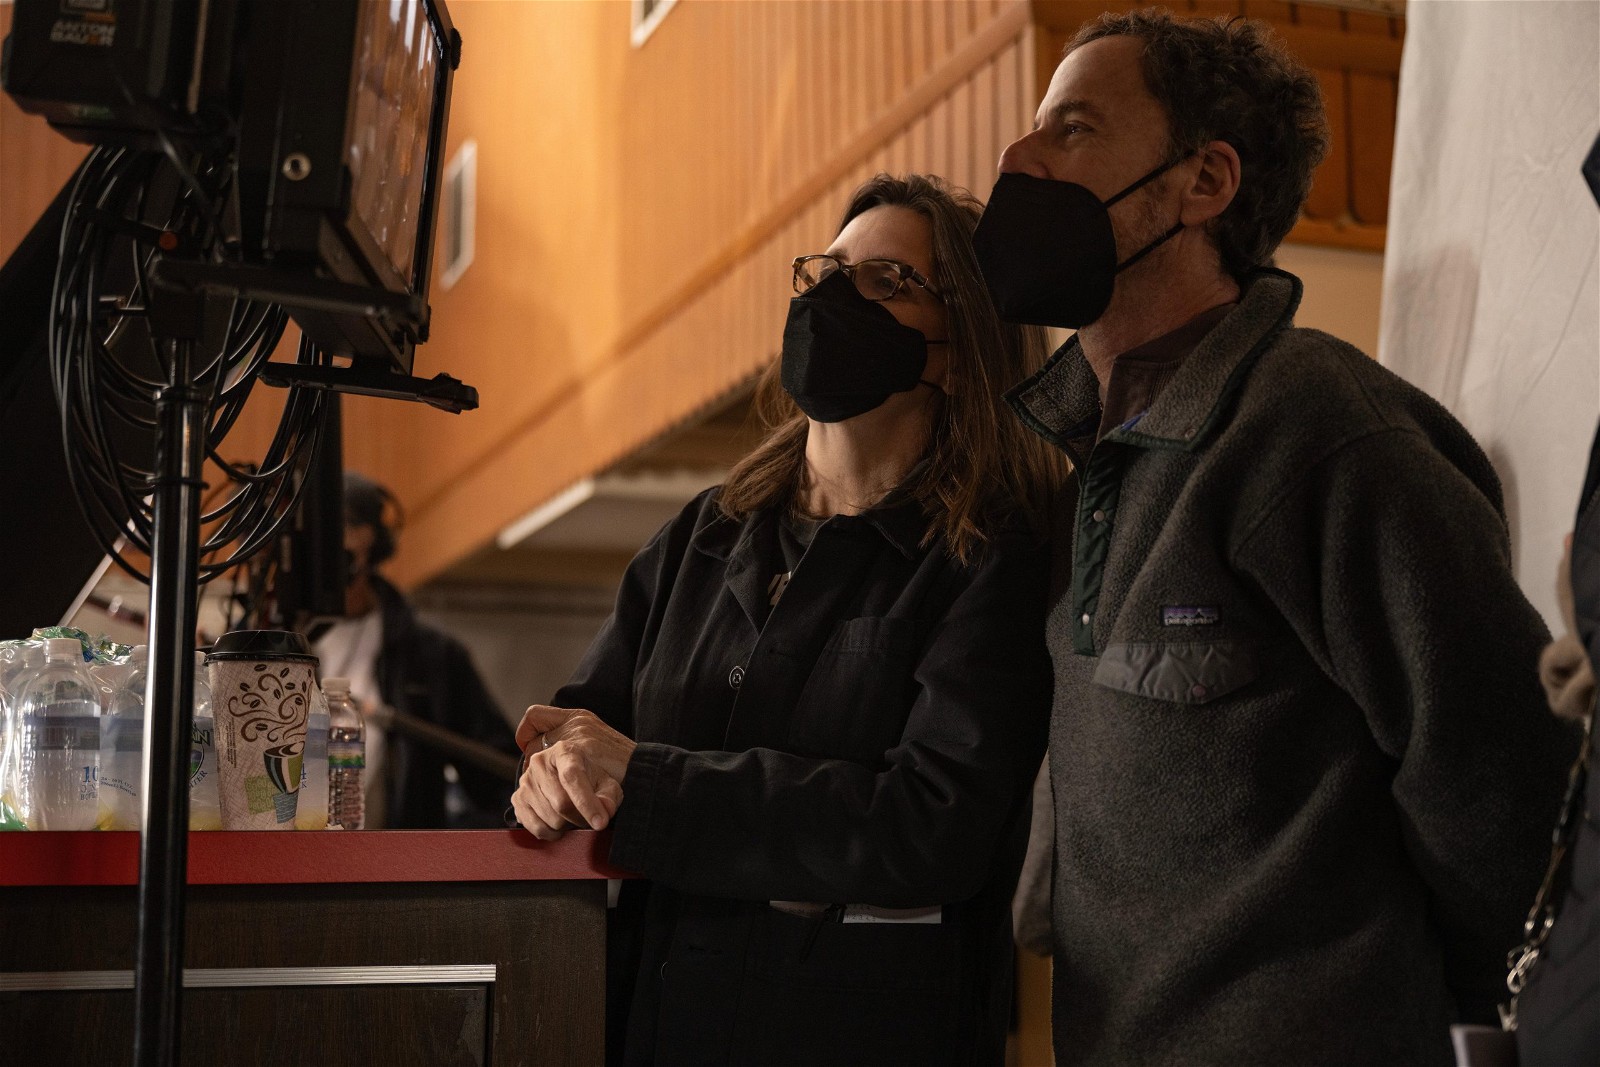 Tricia Cooke and Ethan Coen on the set of Driive-Away Dolls